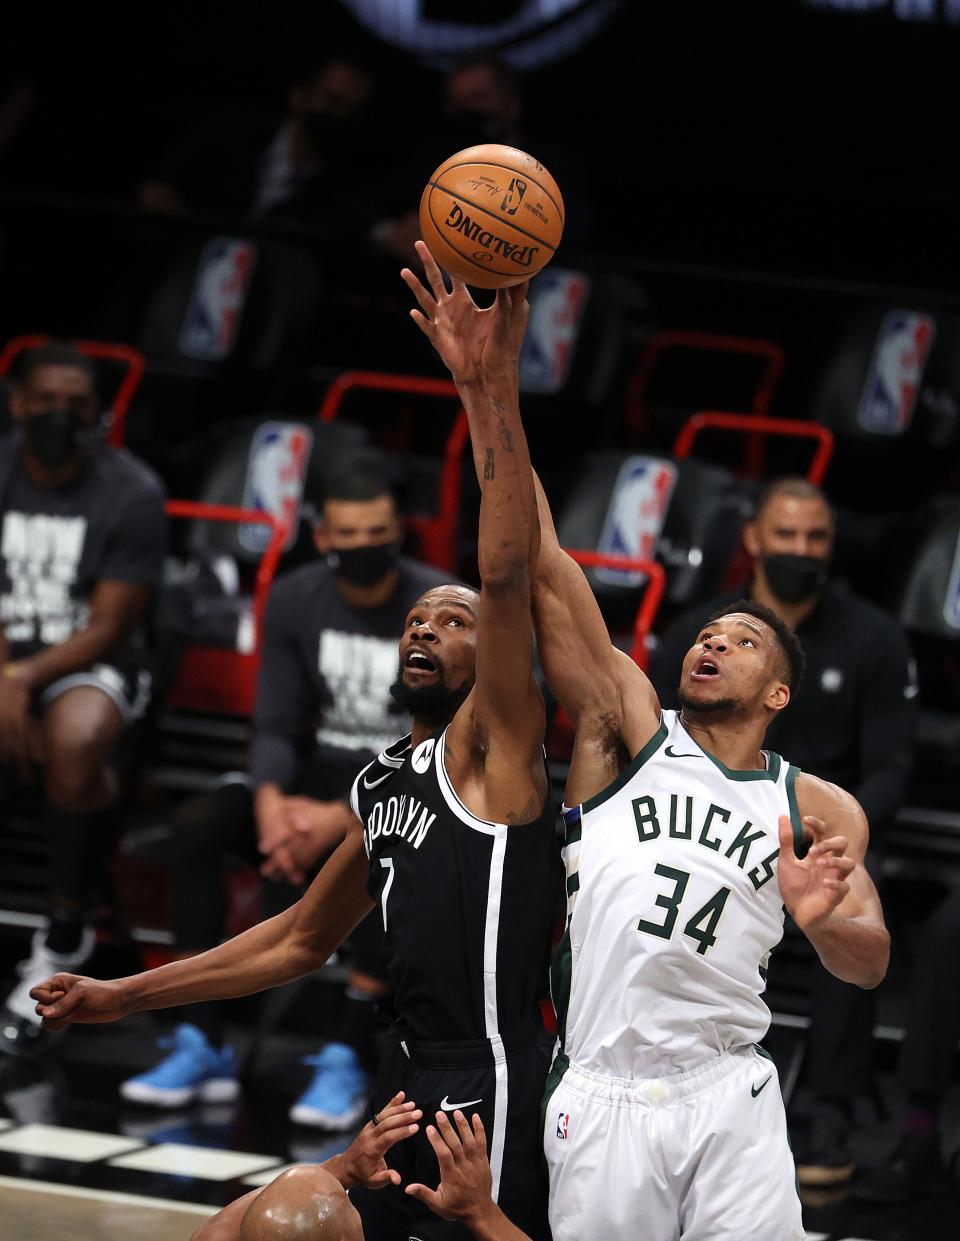 A healthy Kevin Durant could take the Nets on a long ride in the playoffs. But Giannis Antetokounmpo and the Bucks could be a big obstacle.